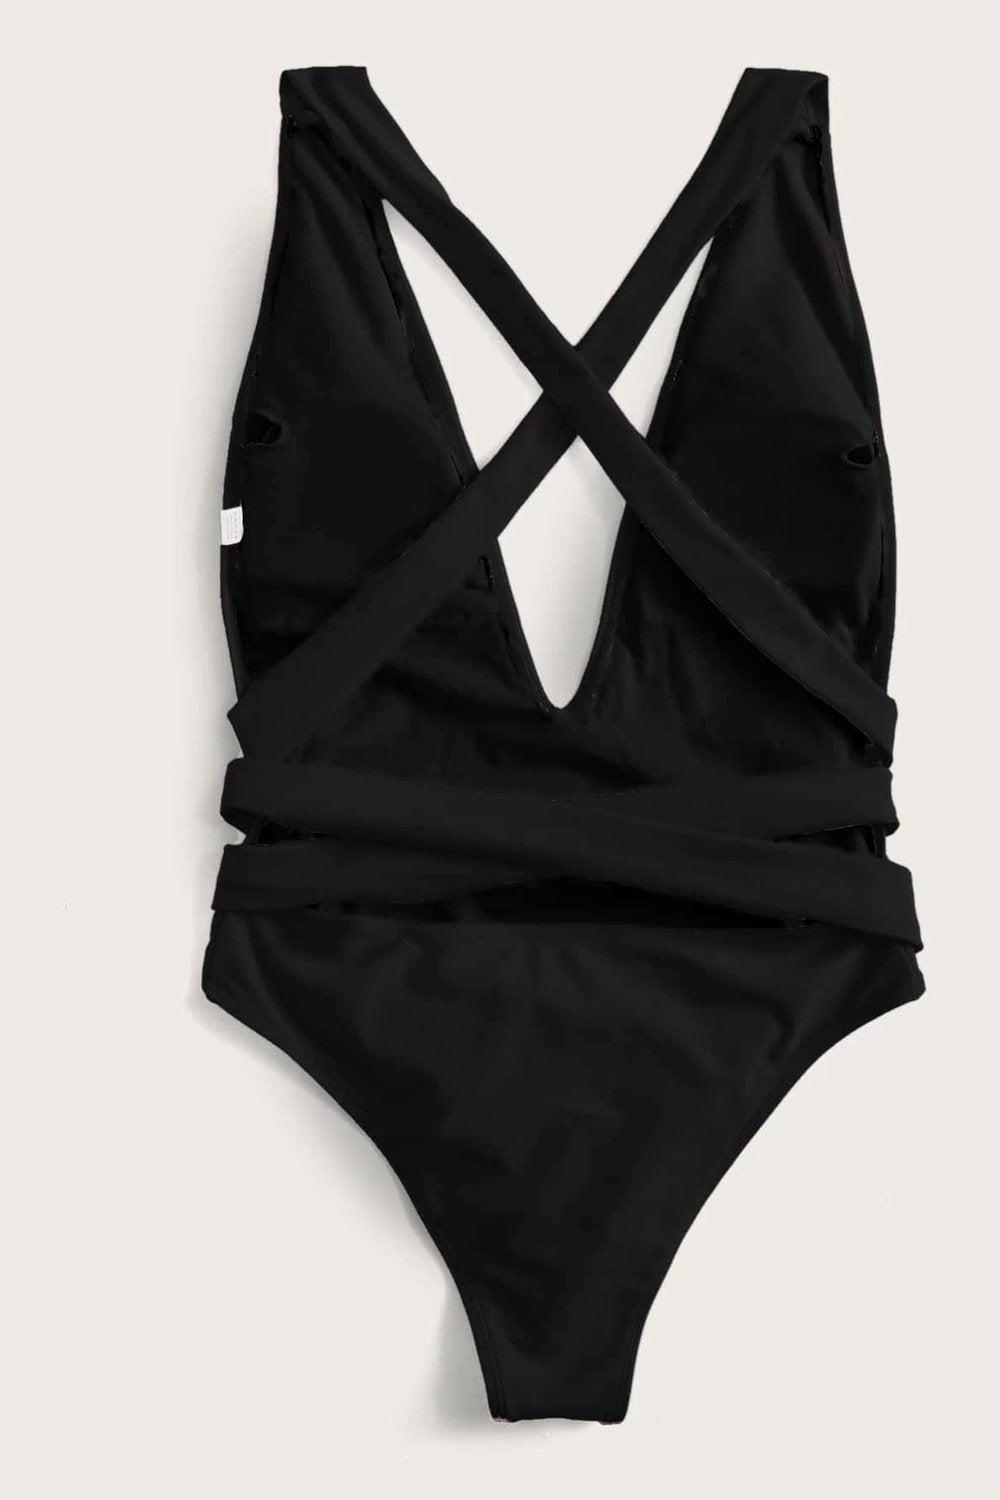 Halter Neck Deep V Tied One-Piece Swimsuit - Swimwear One-Pieces - FITGGINS